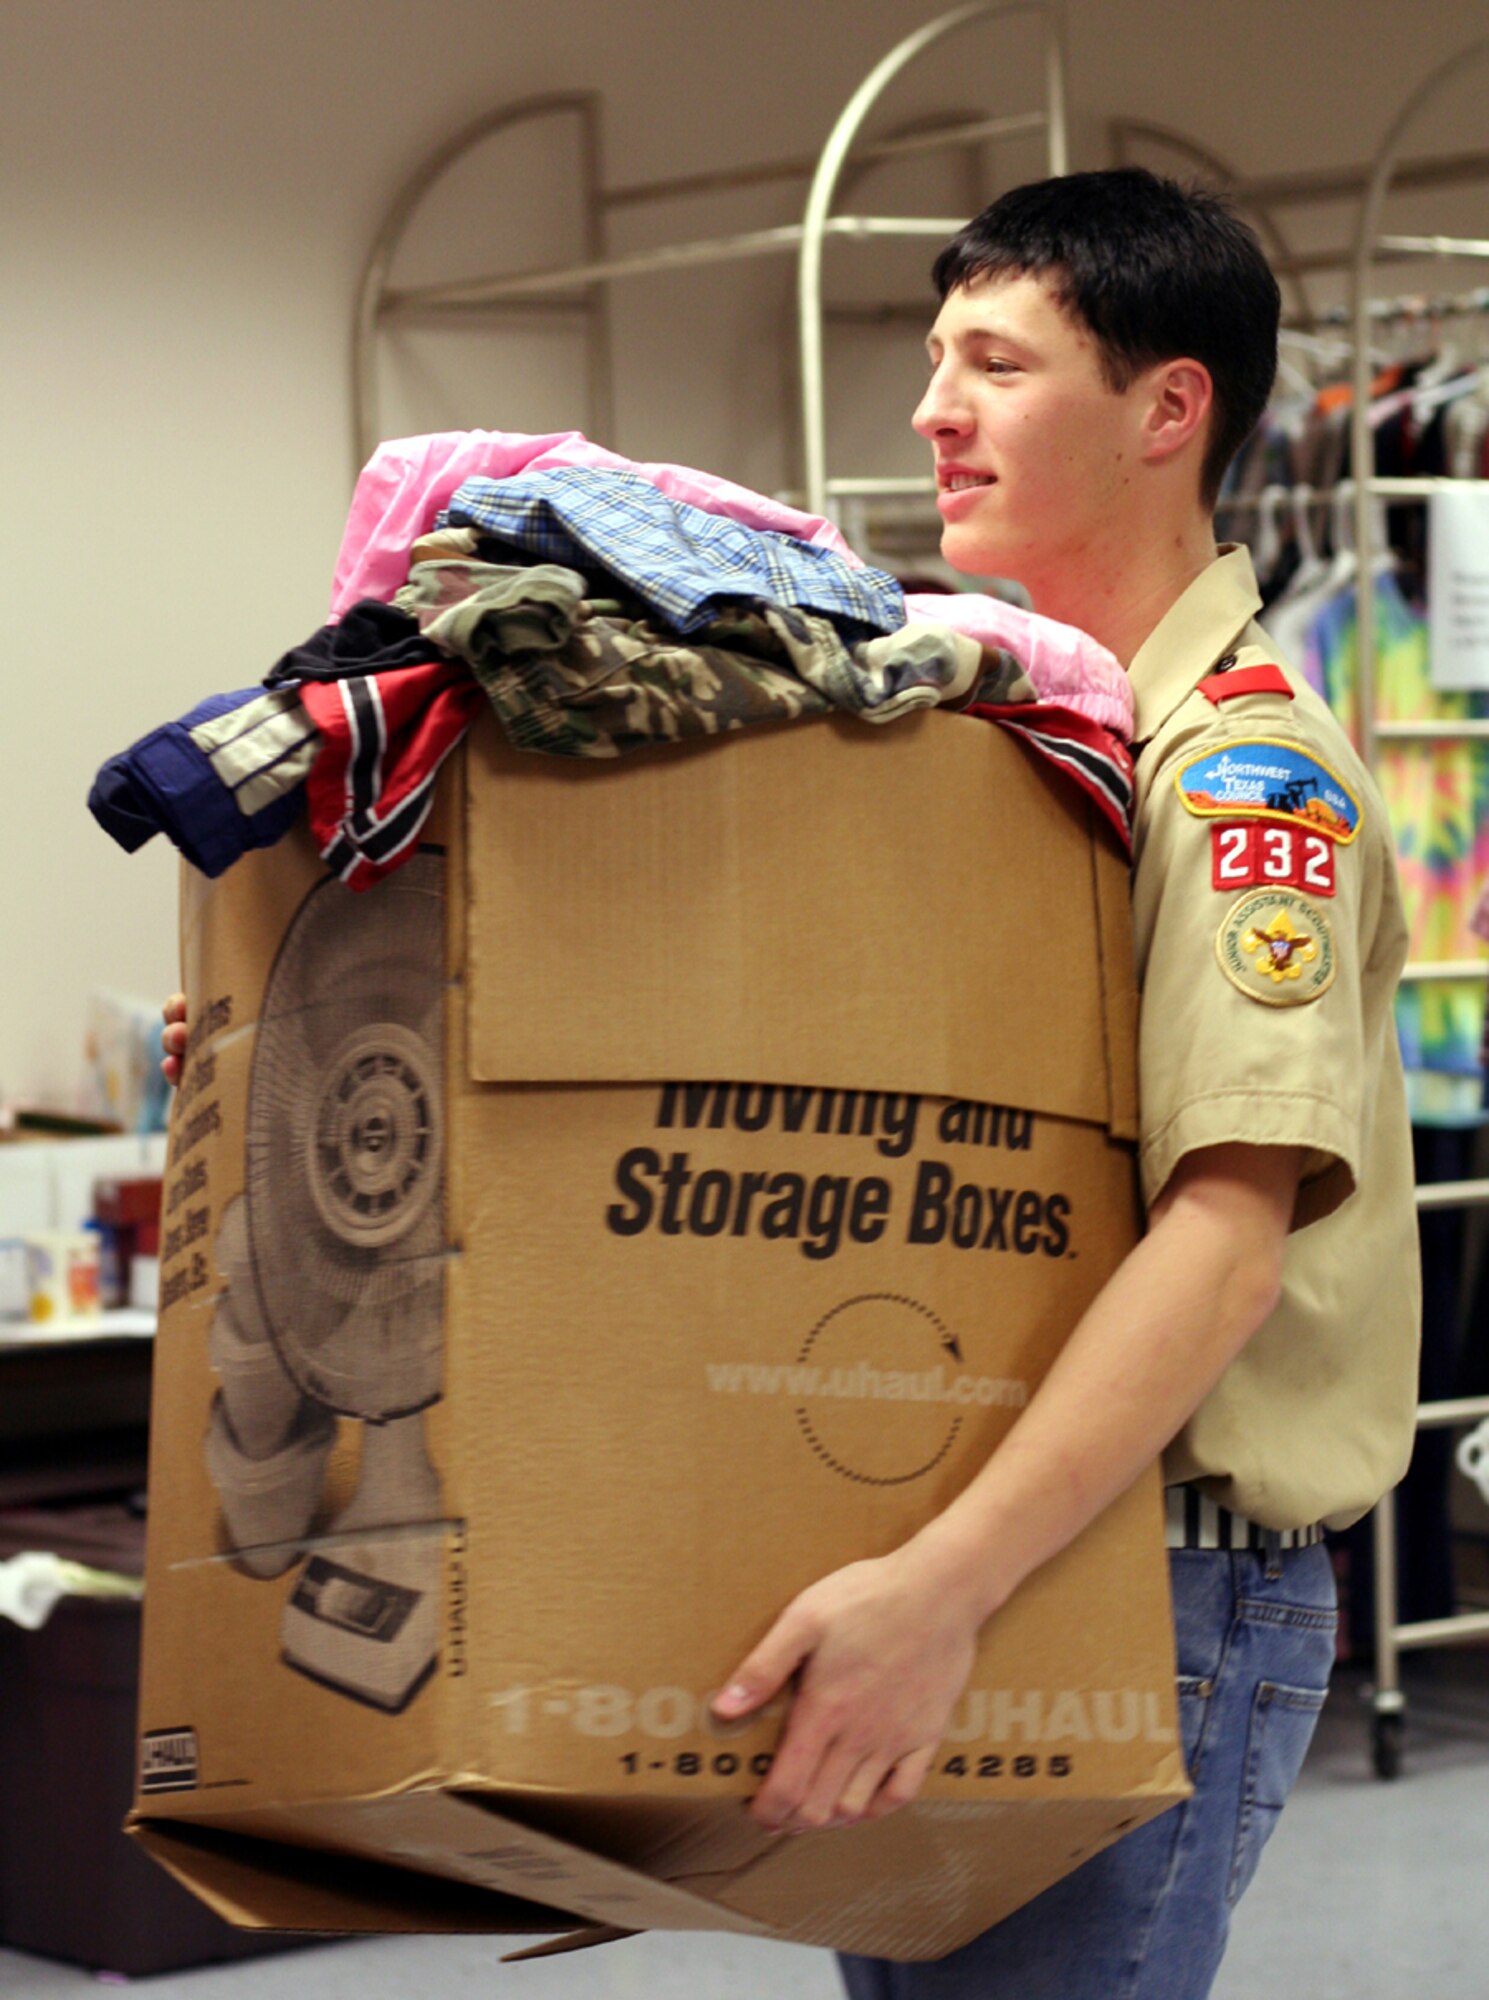 Neil Kendall, a Boy Scout with Troop 232 on Sheppard, makes room for more donated items Feb. 24. Neil, the son of 80th Flying Training Wing Commander Col. Jeffrey and Lori Kendall, organized a drive to collect various items from base housing areas for delivery to the Airman's Attic. (U.S. Air Force photo/Adrian McCandless)